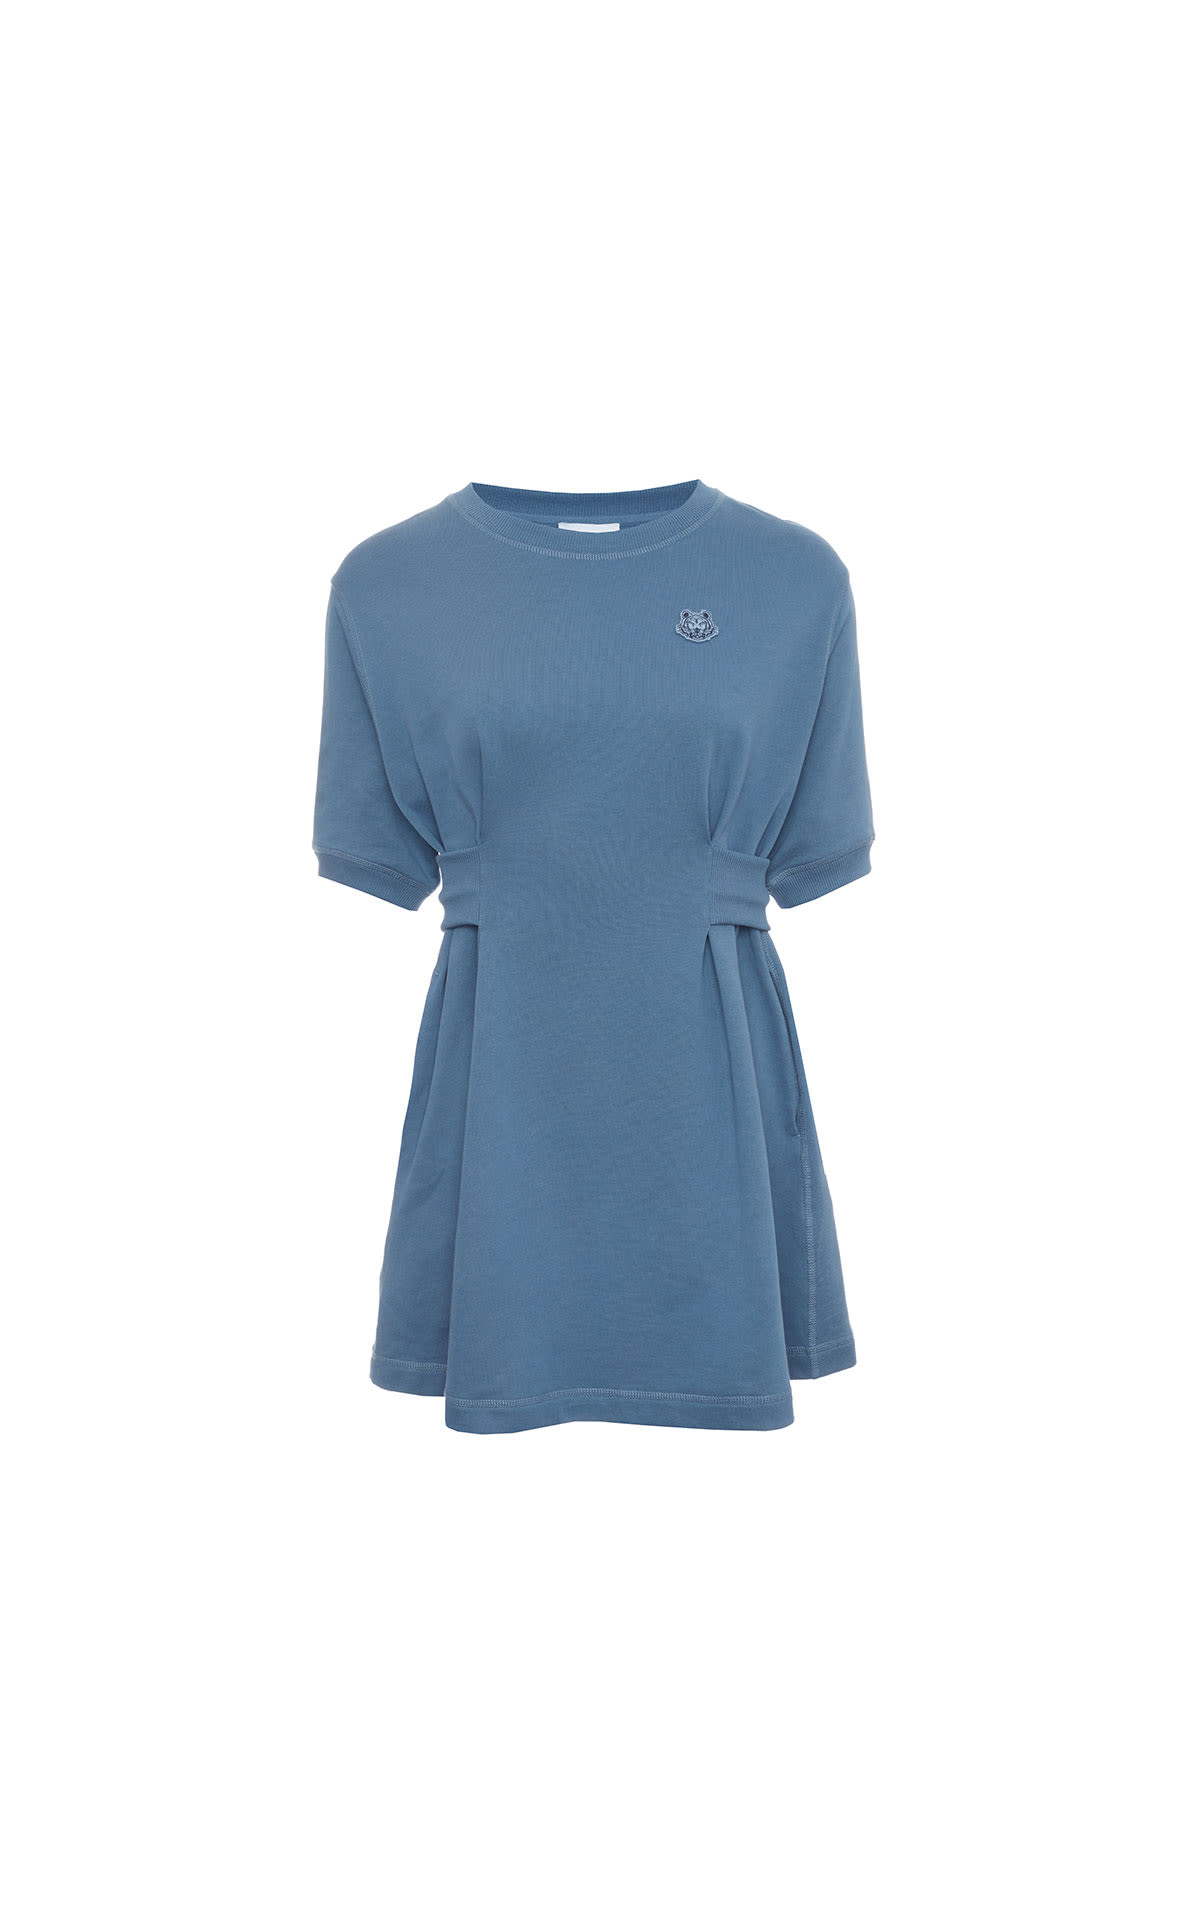 KENZO Cotton dress from Bicester Village